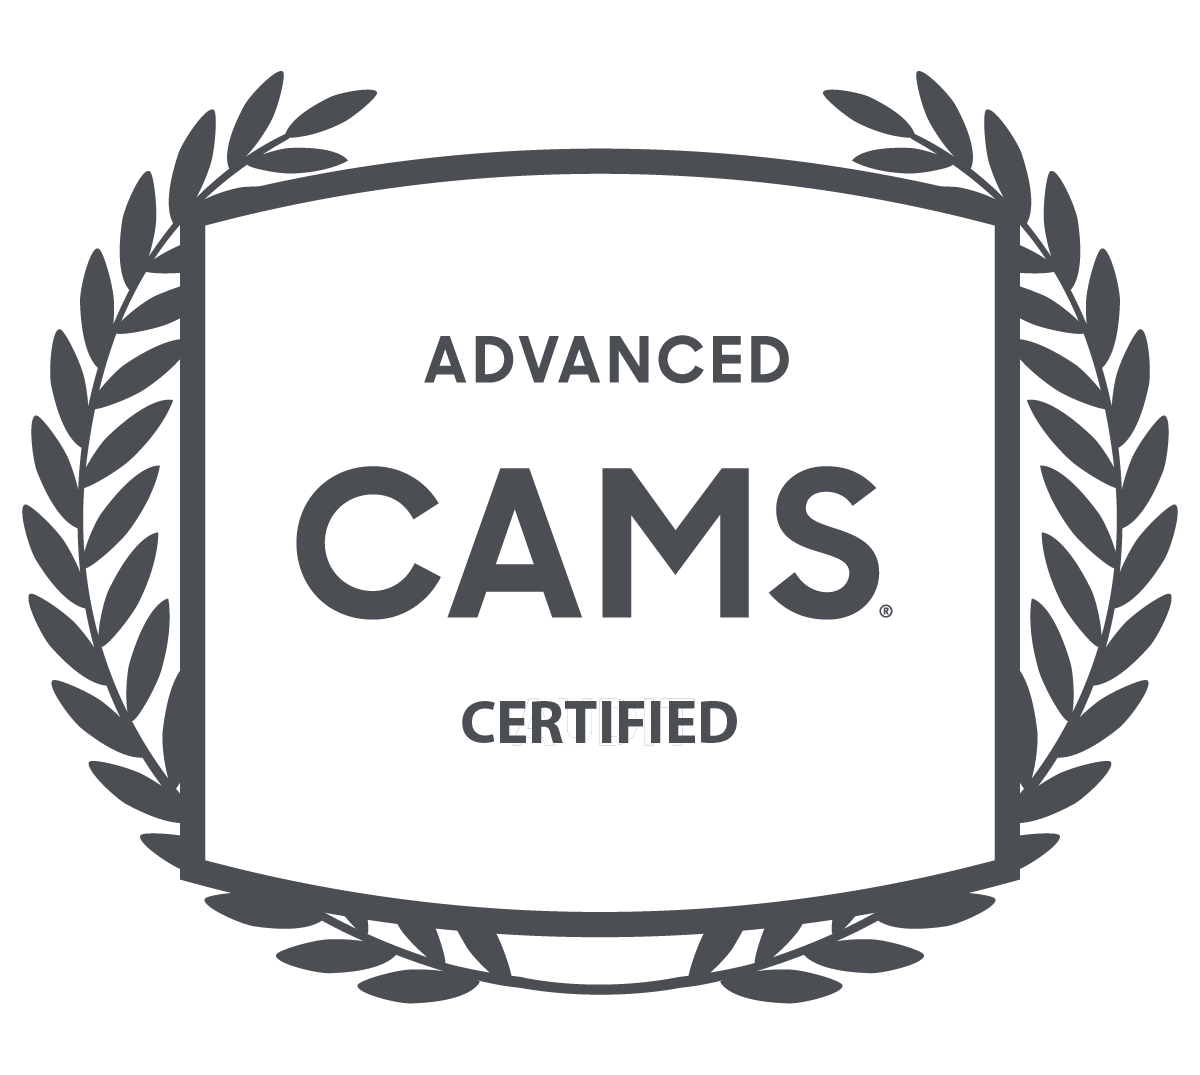 Advanced CAMS Certified Crest